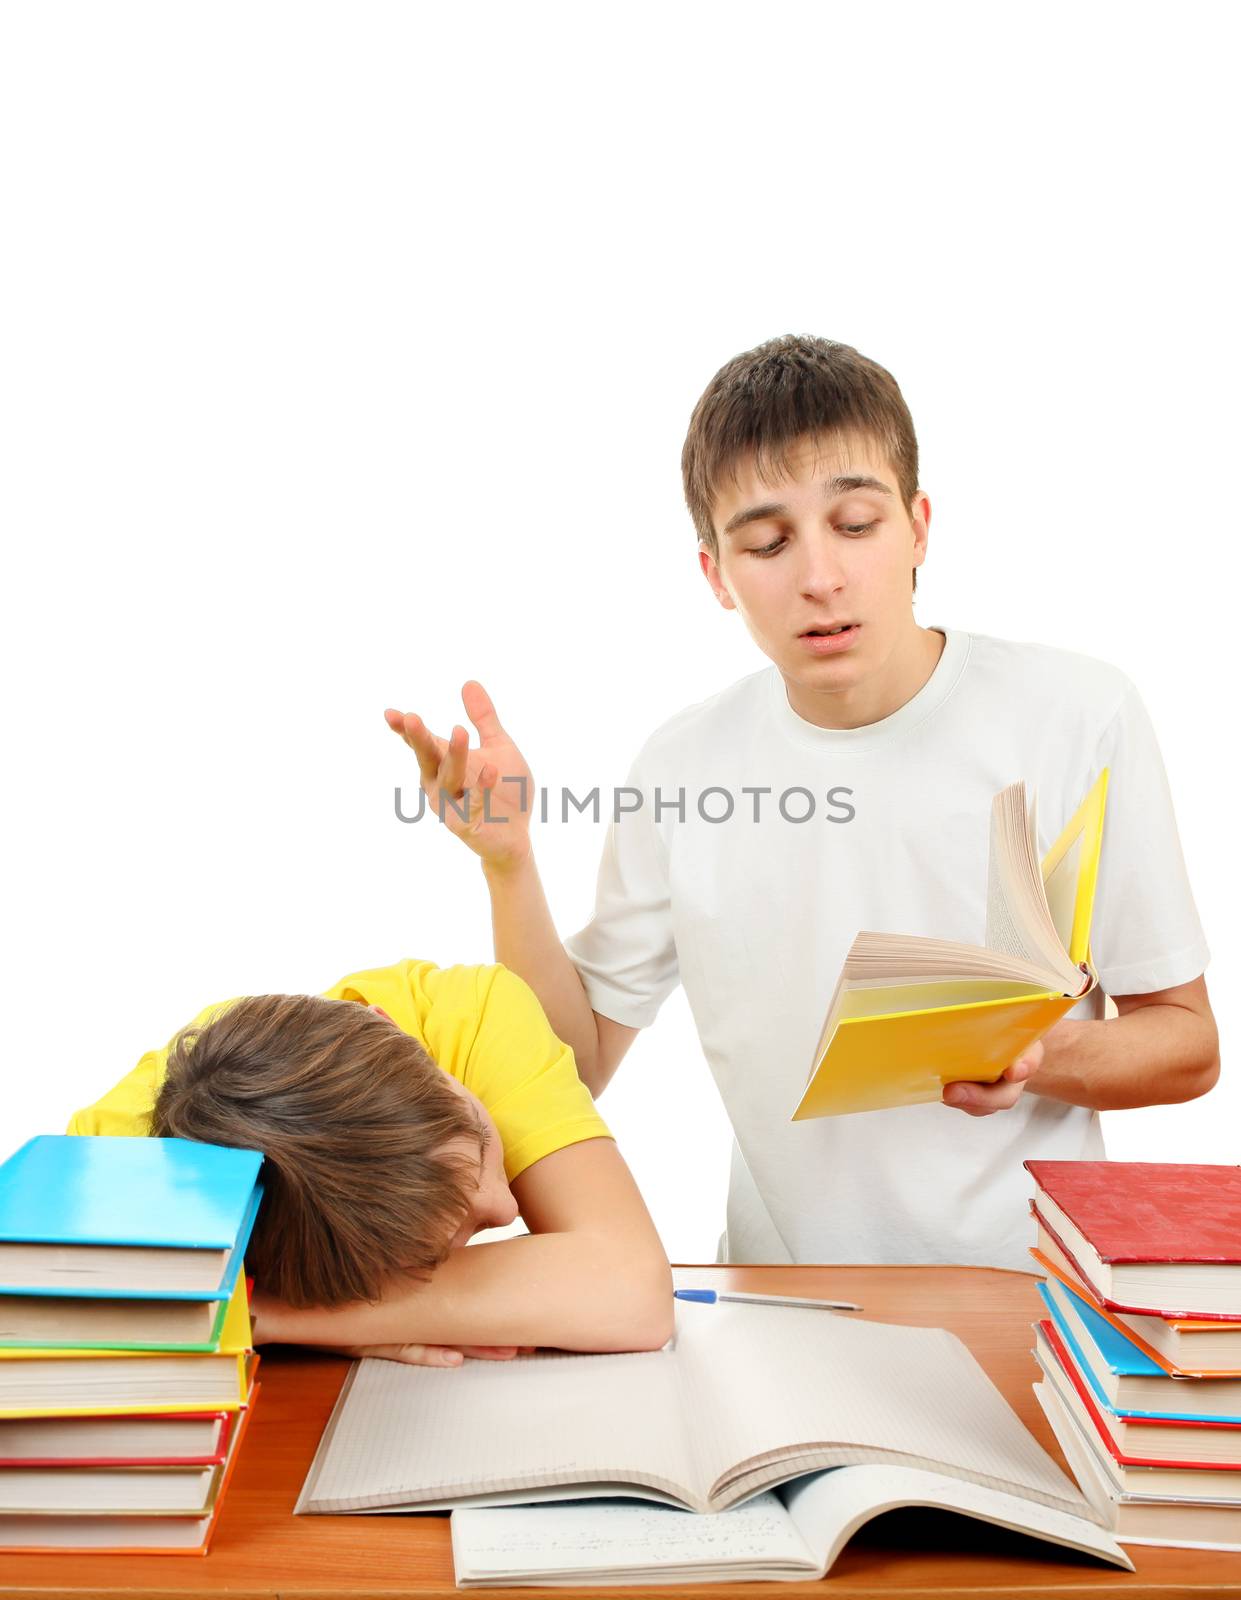 Older Brother and Bored Little Brother doing Homework on the White Background